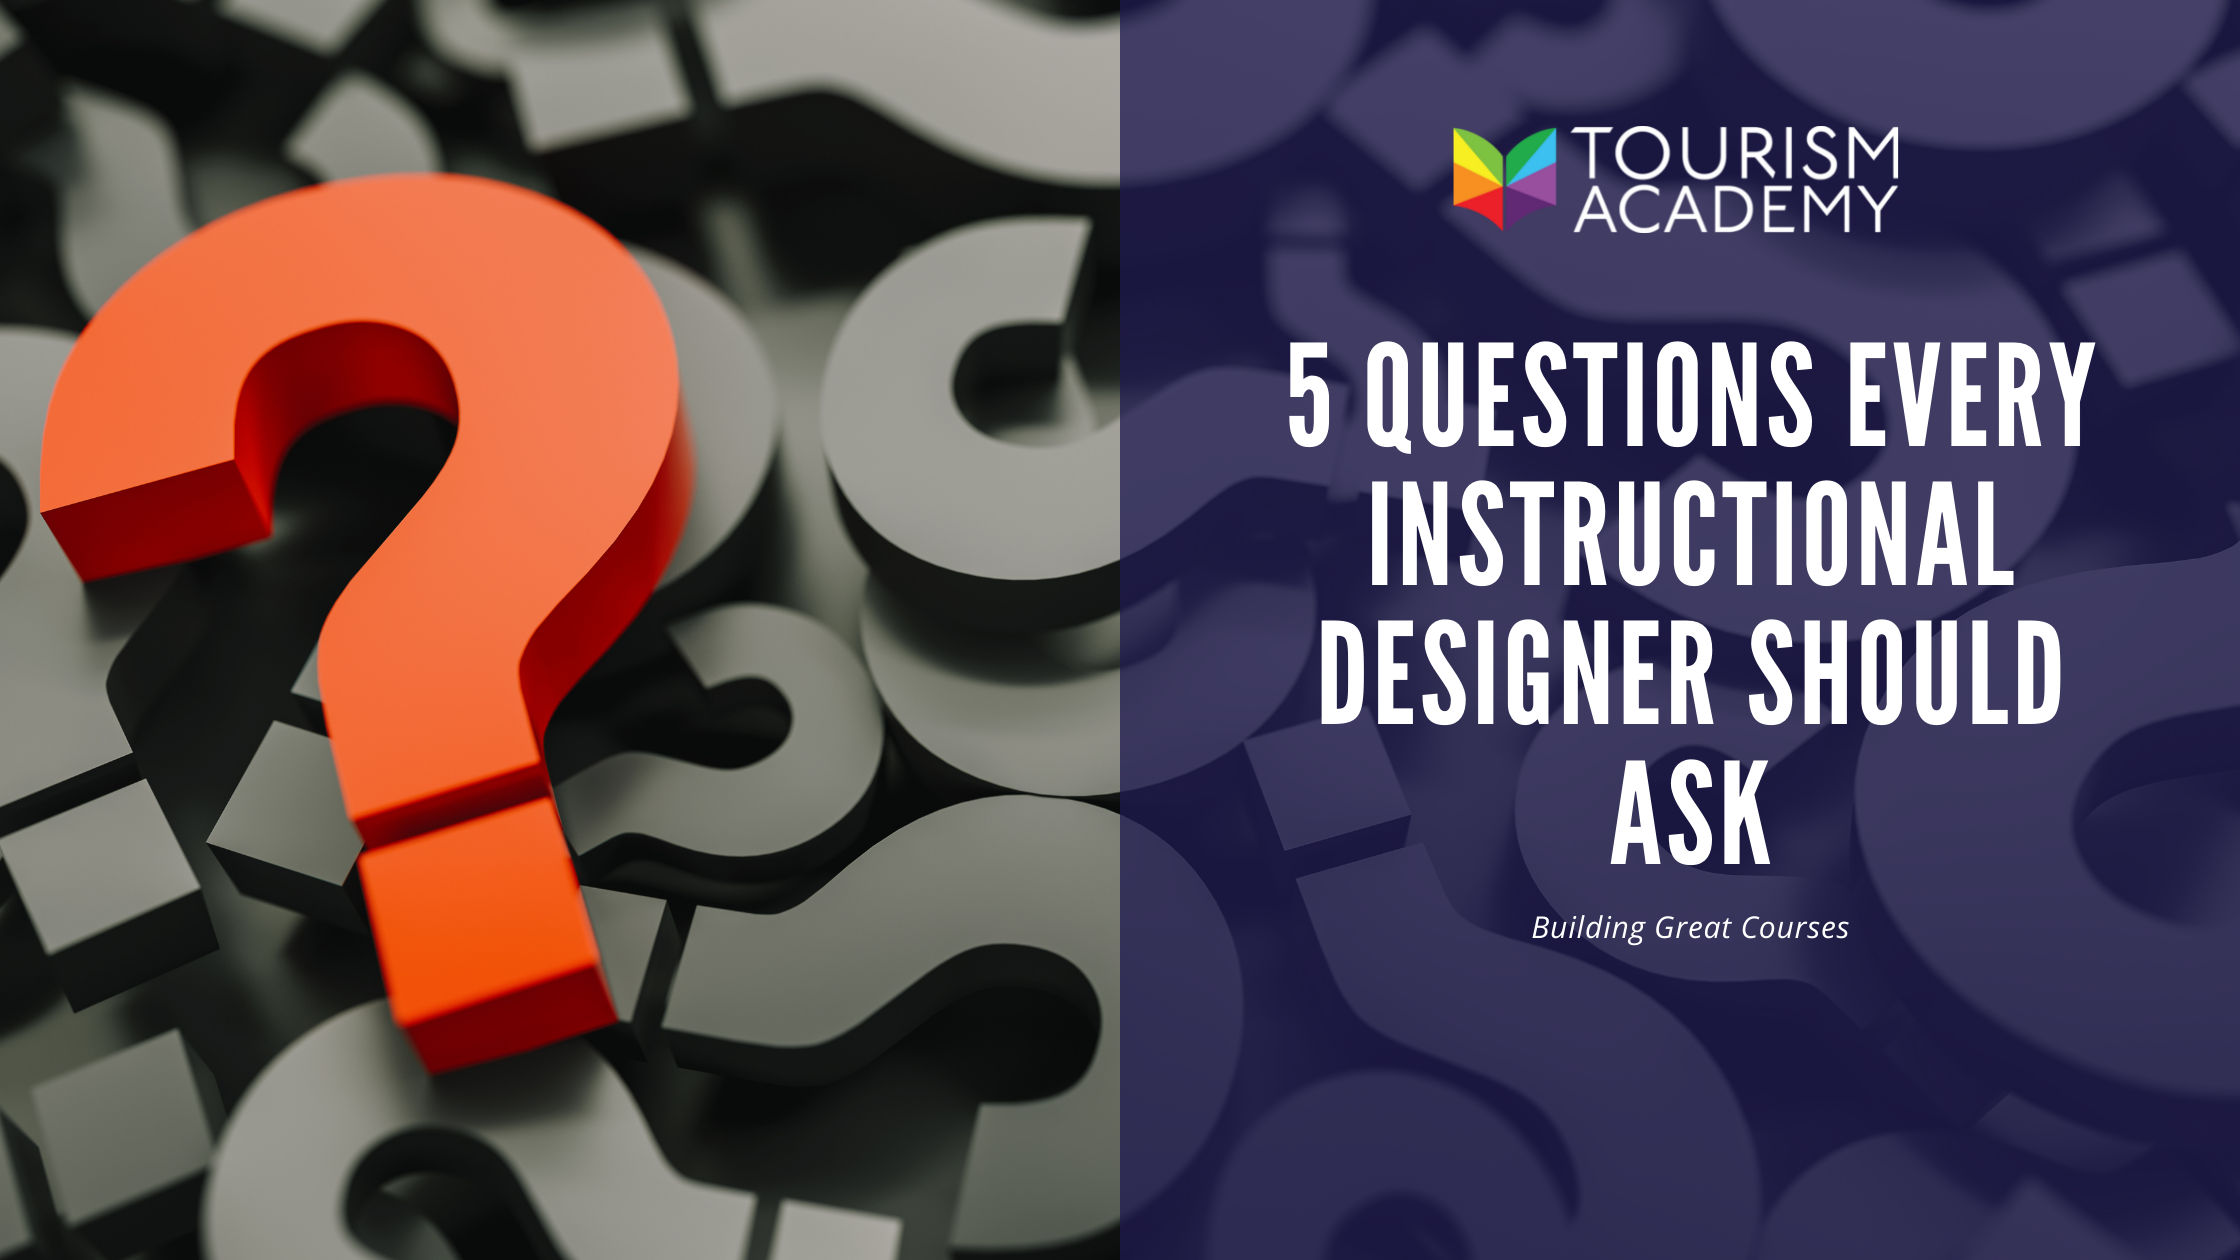 5 Questions Every Instructional Designer Should Ask